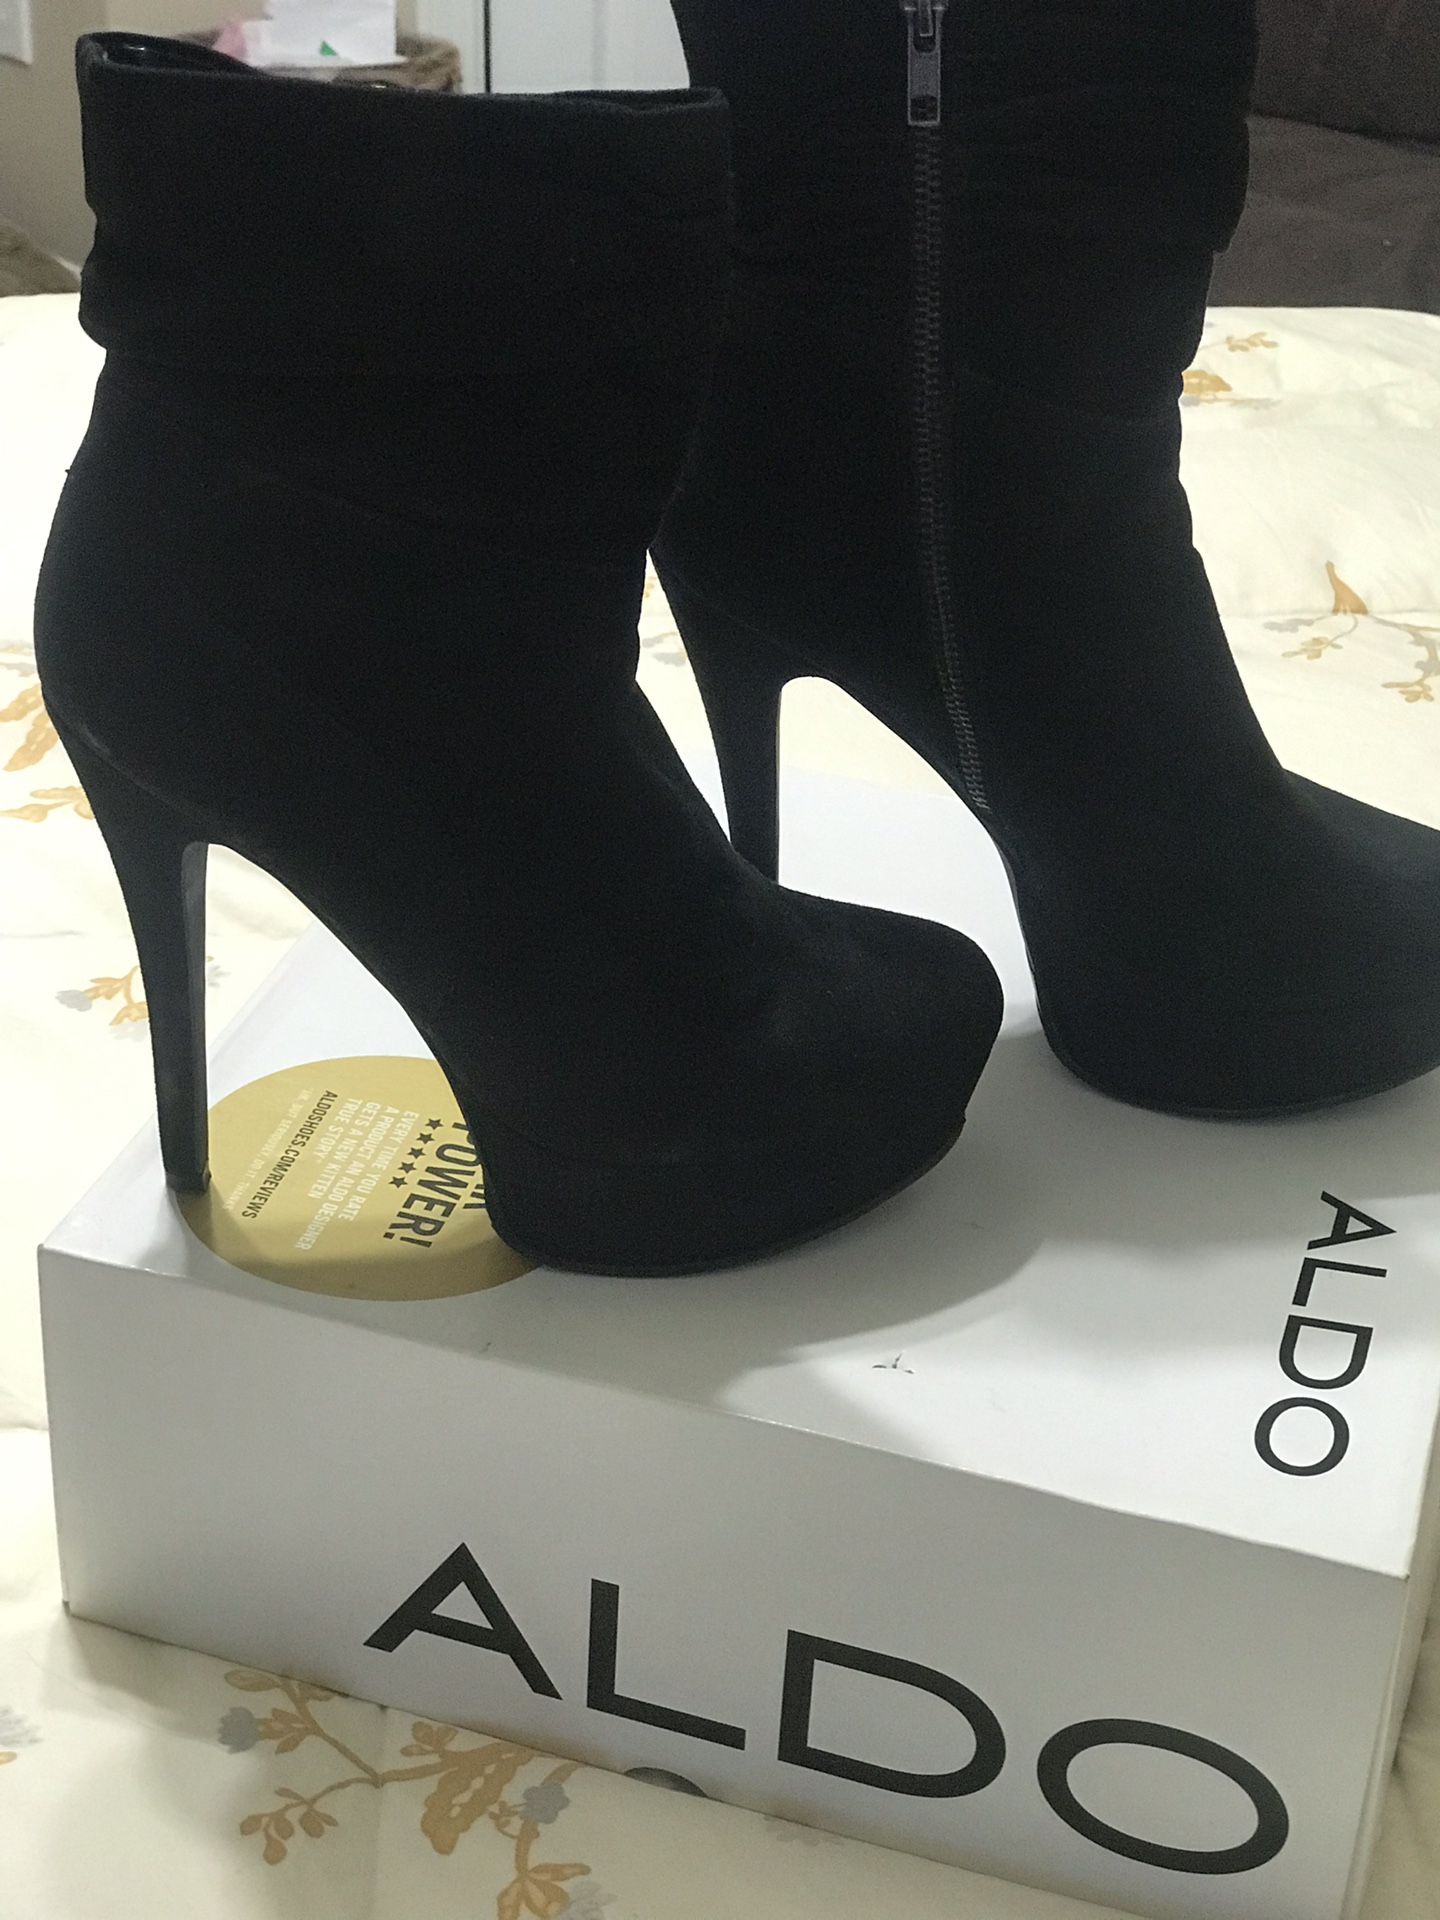 ALDO SUEDE LEATHER BOOTS SIZE 8